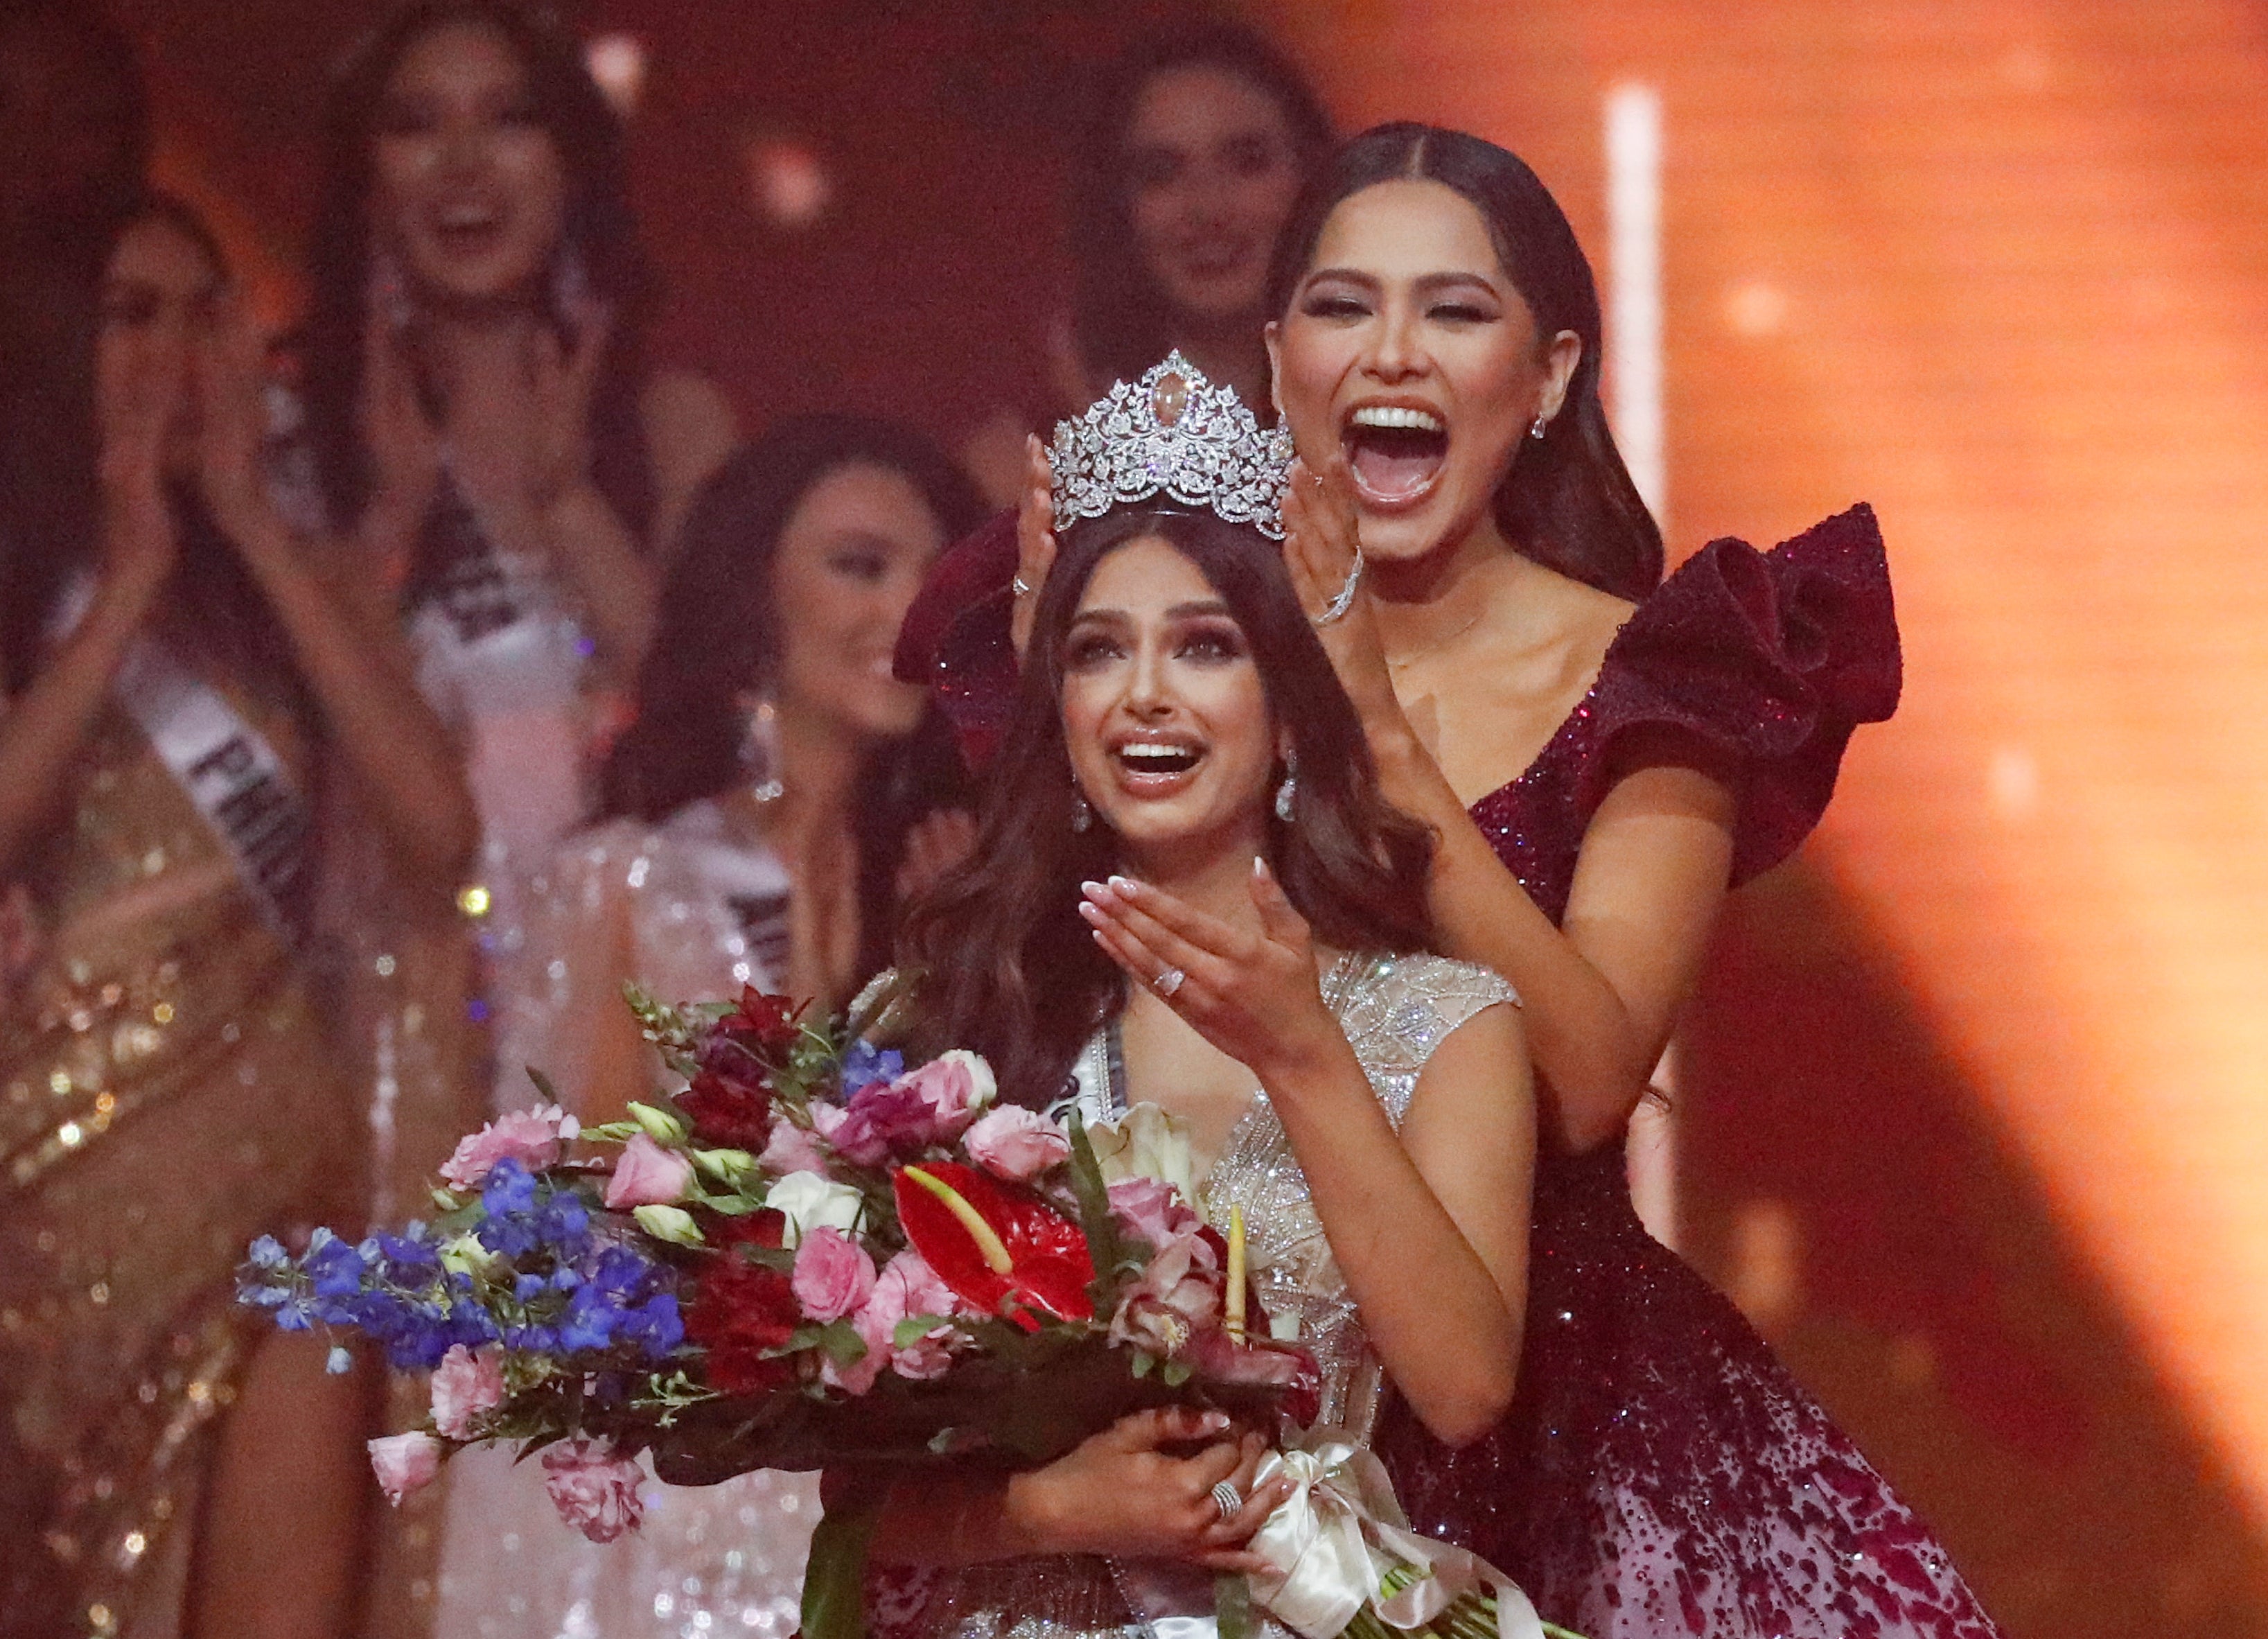 Next Miss Universe pageant to be broadcast from New Orleans The